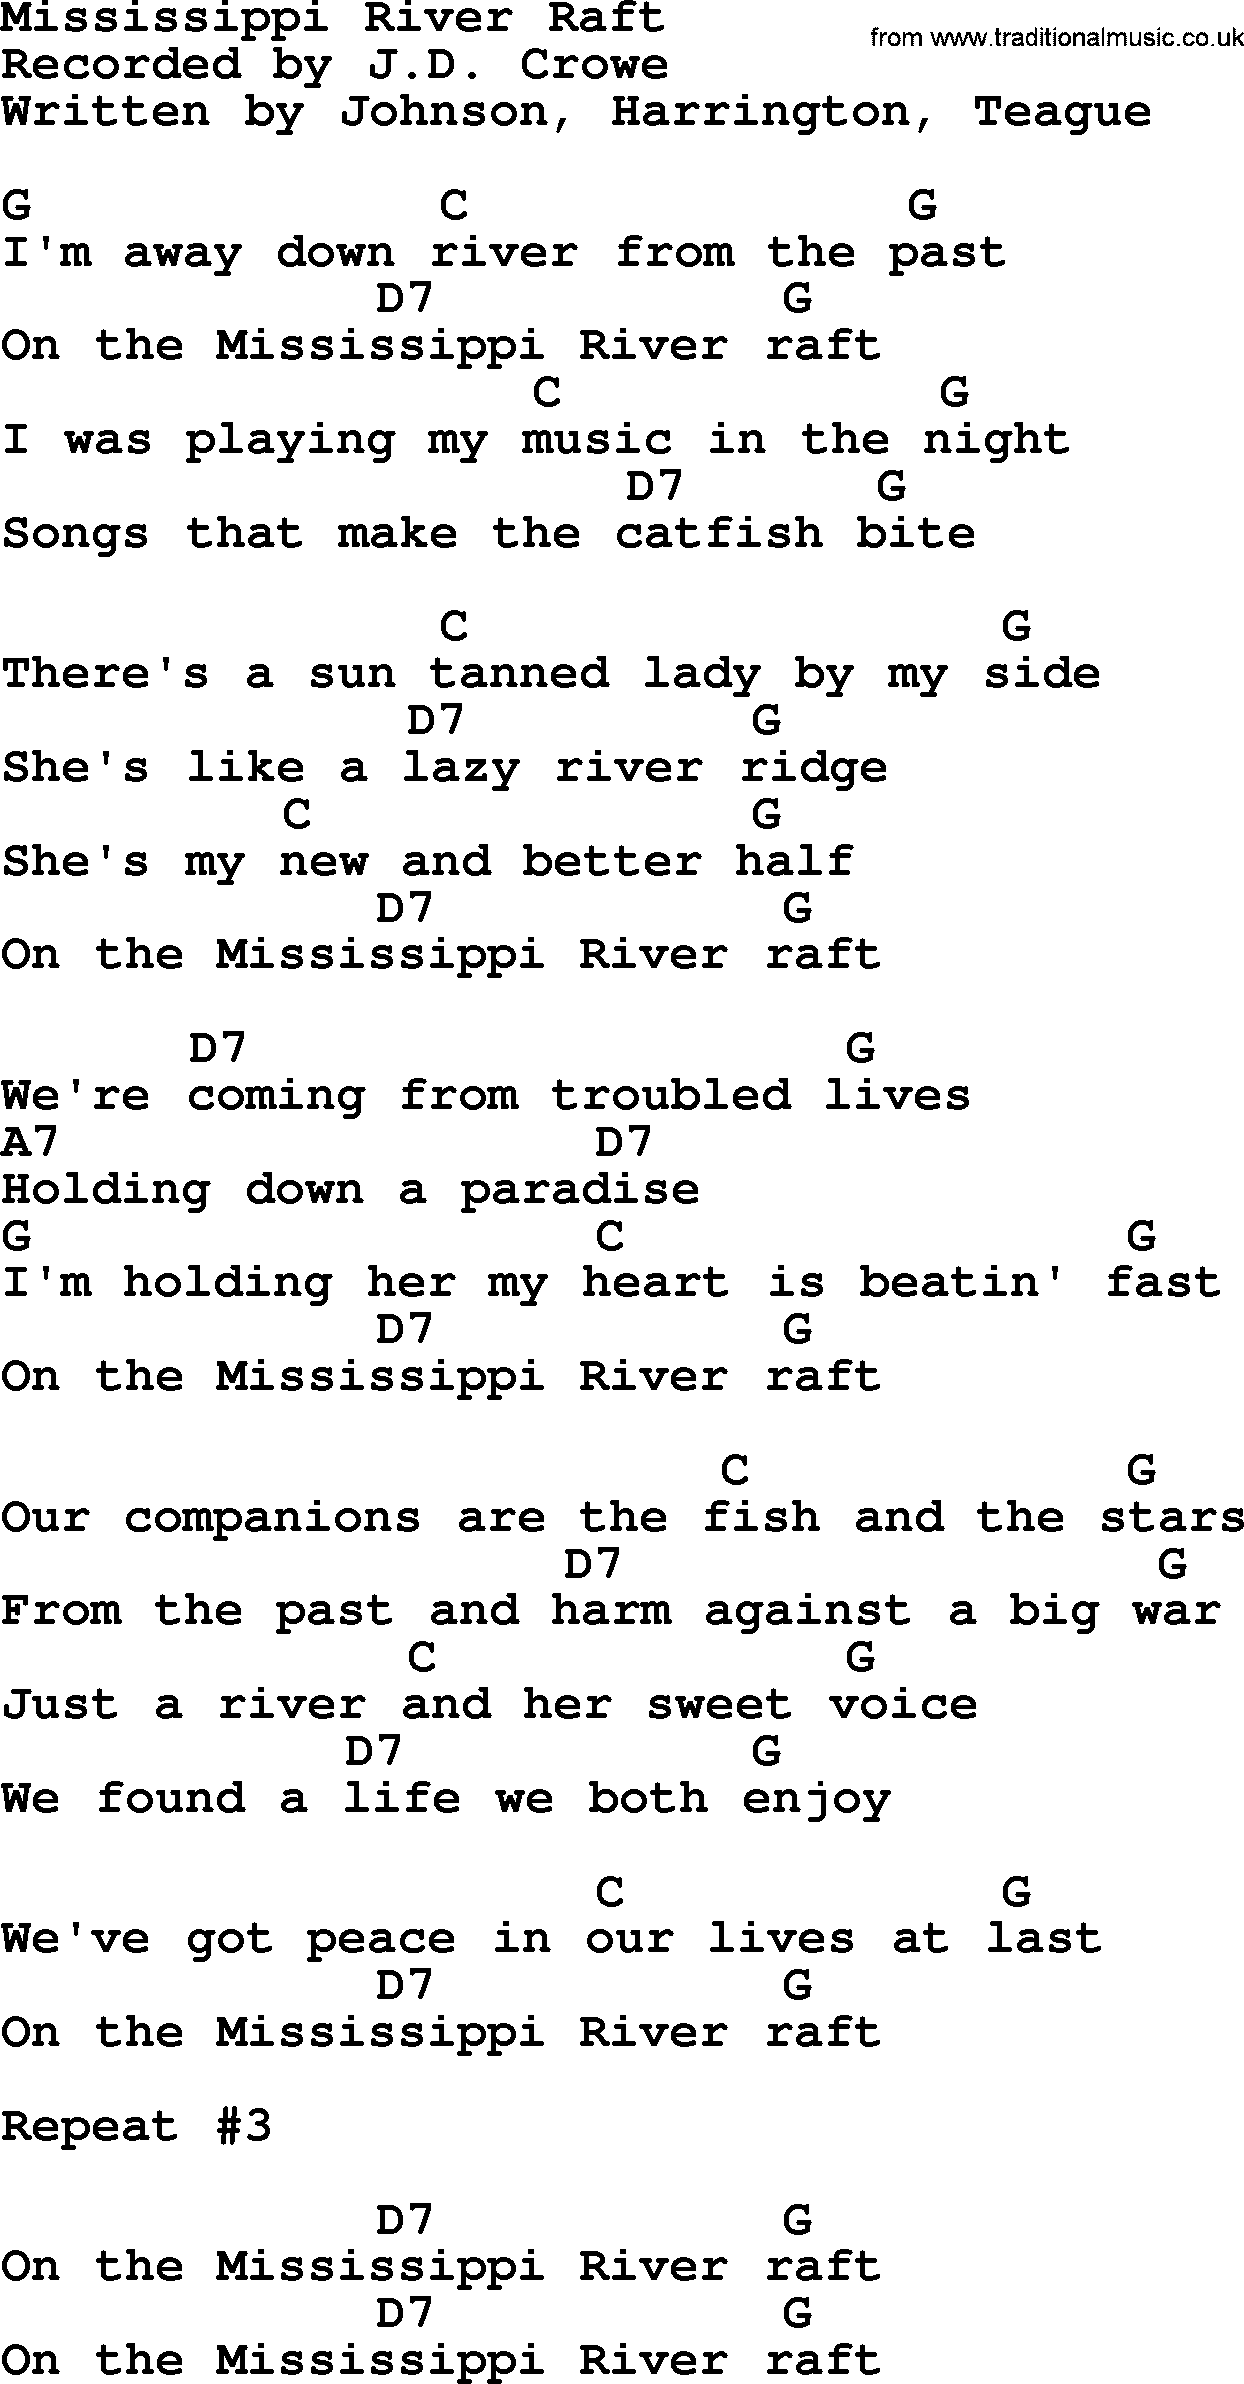 Bluegrass song: Mississippi River Raft, lyrics and chords